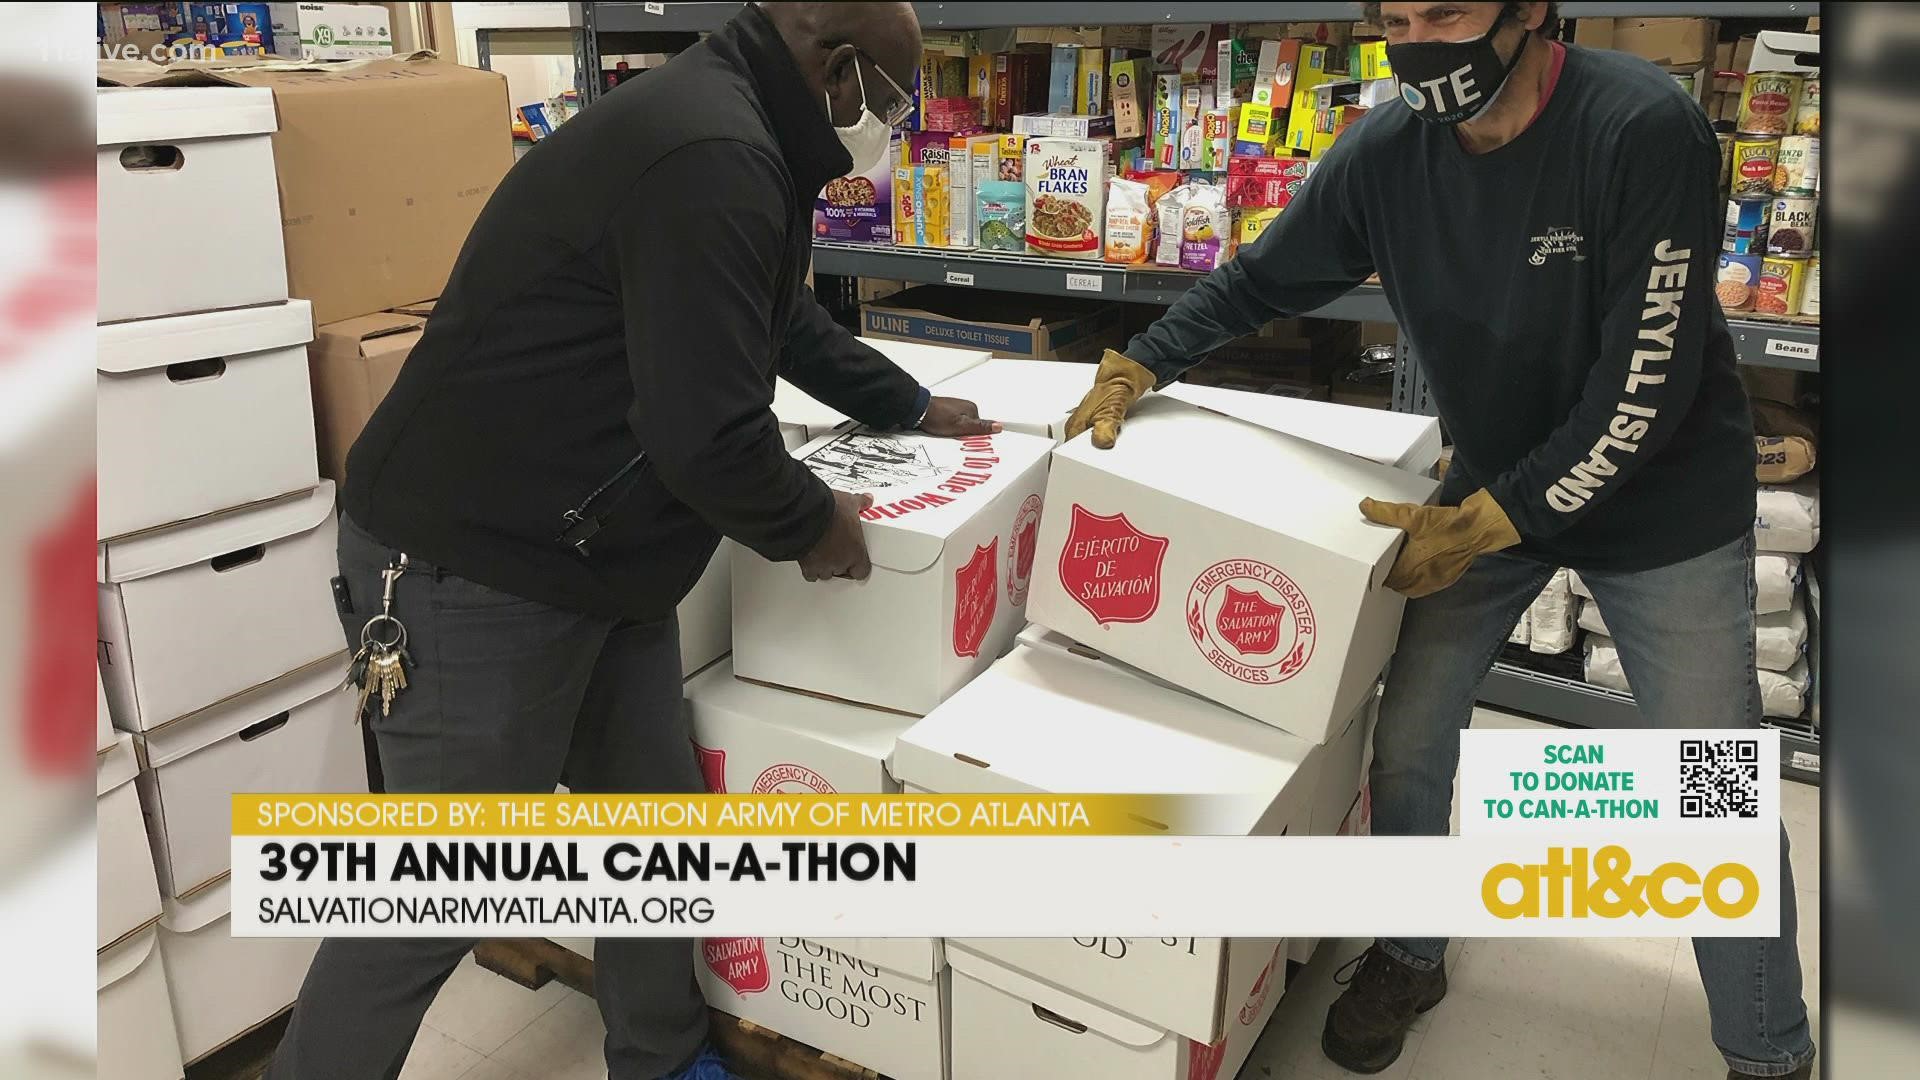 The 39th Annual Can-A-Thon is underway all over metro Atlanta. Donate to families in need this giving season.